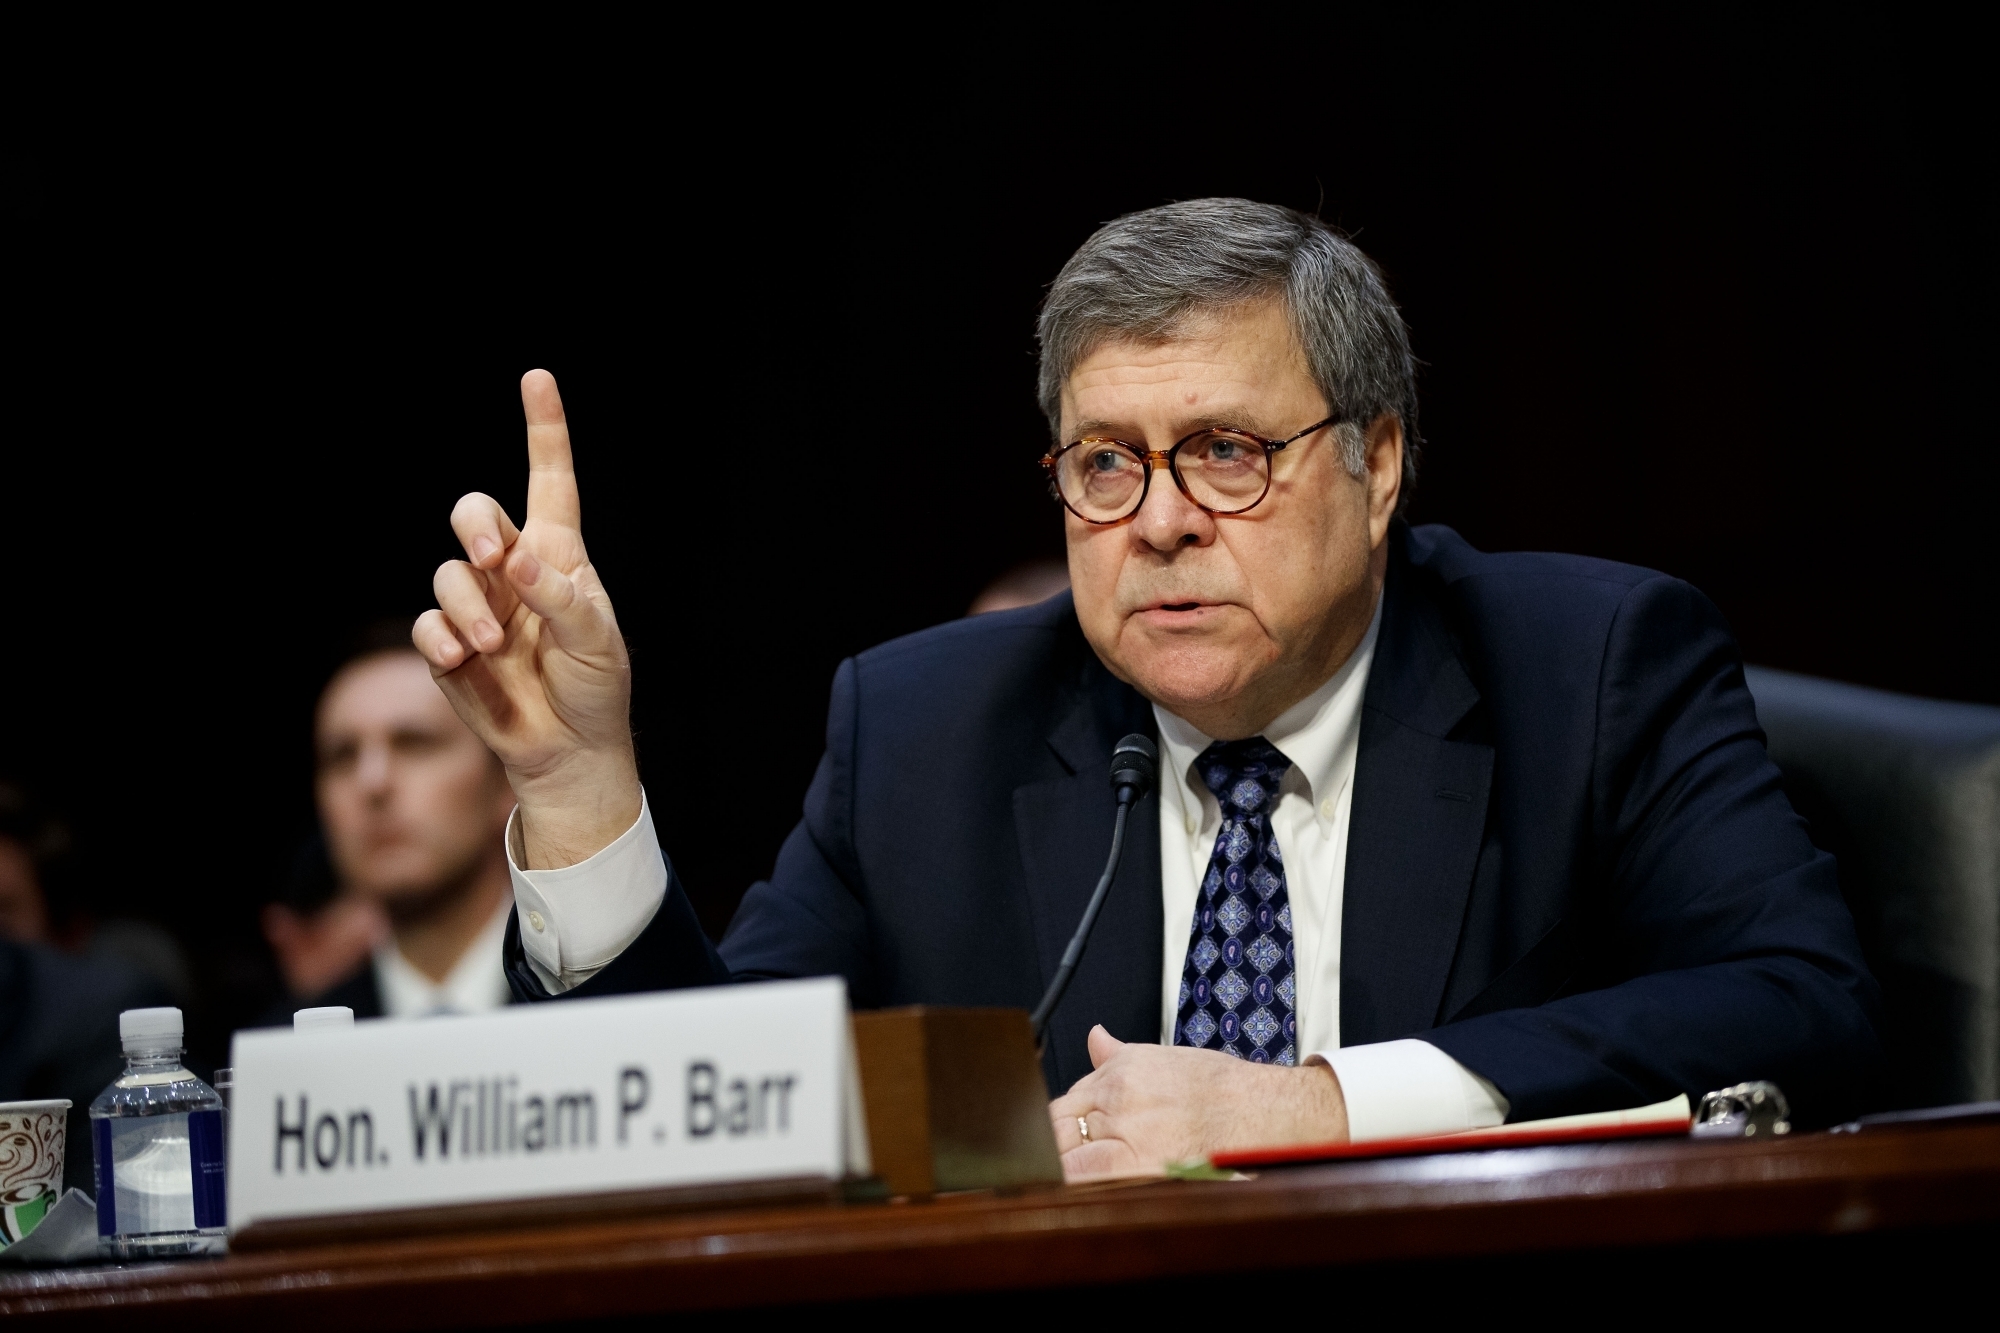 UPDATE 1-U.S., allies should consider Nokia, Ericsson investments to counter Huawei -Barr